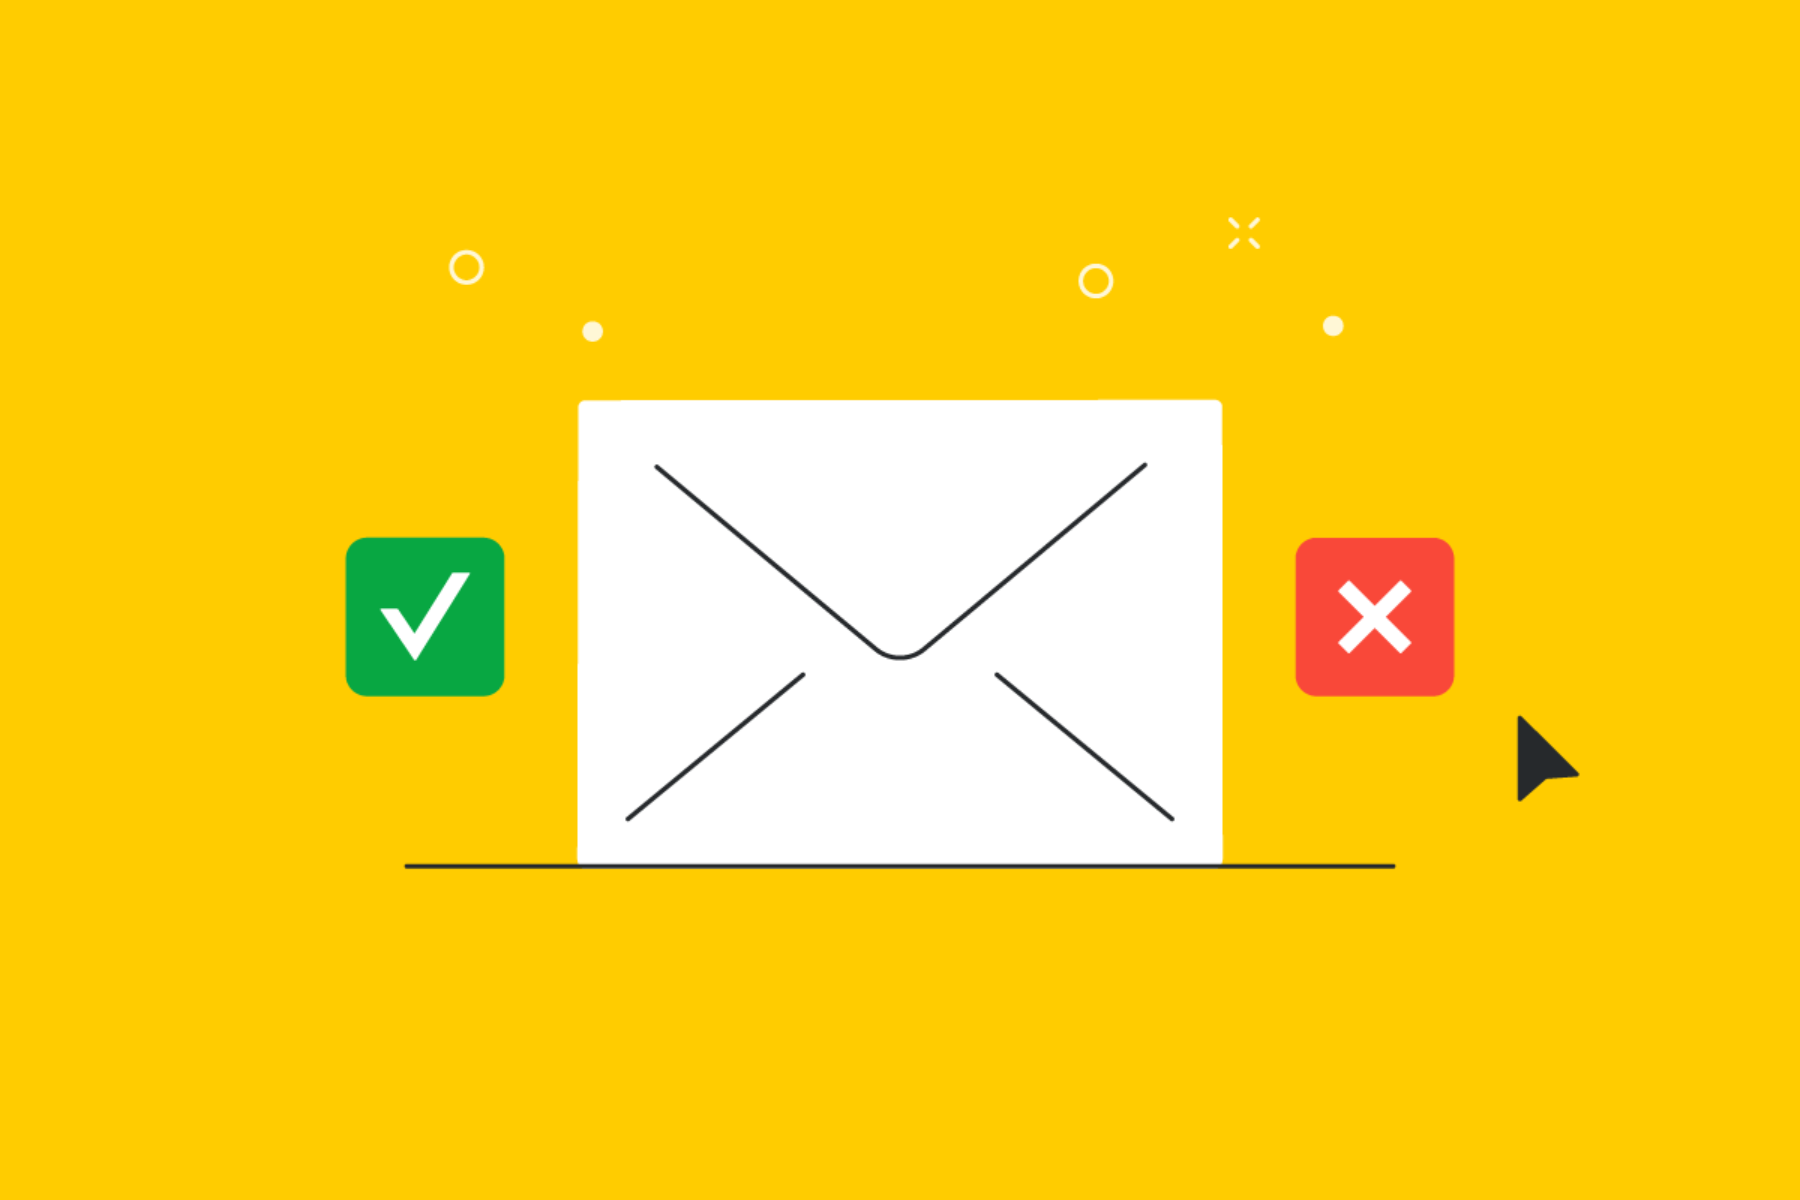 An image of a mail letter with two buttons "Agree" and "Disagree"